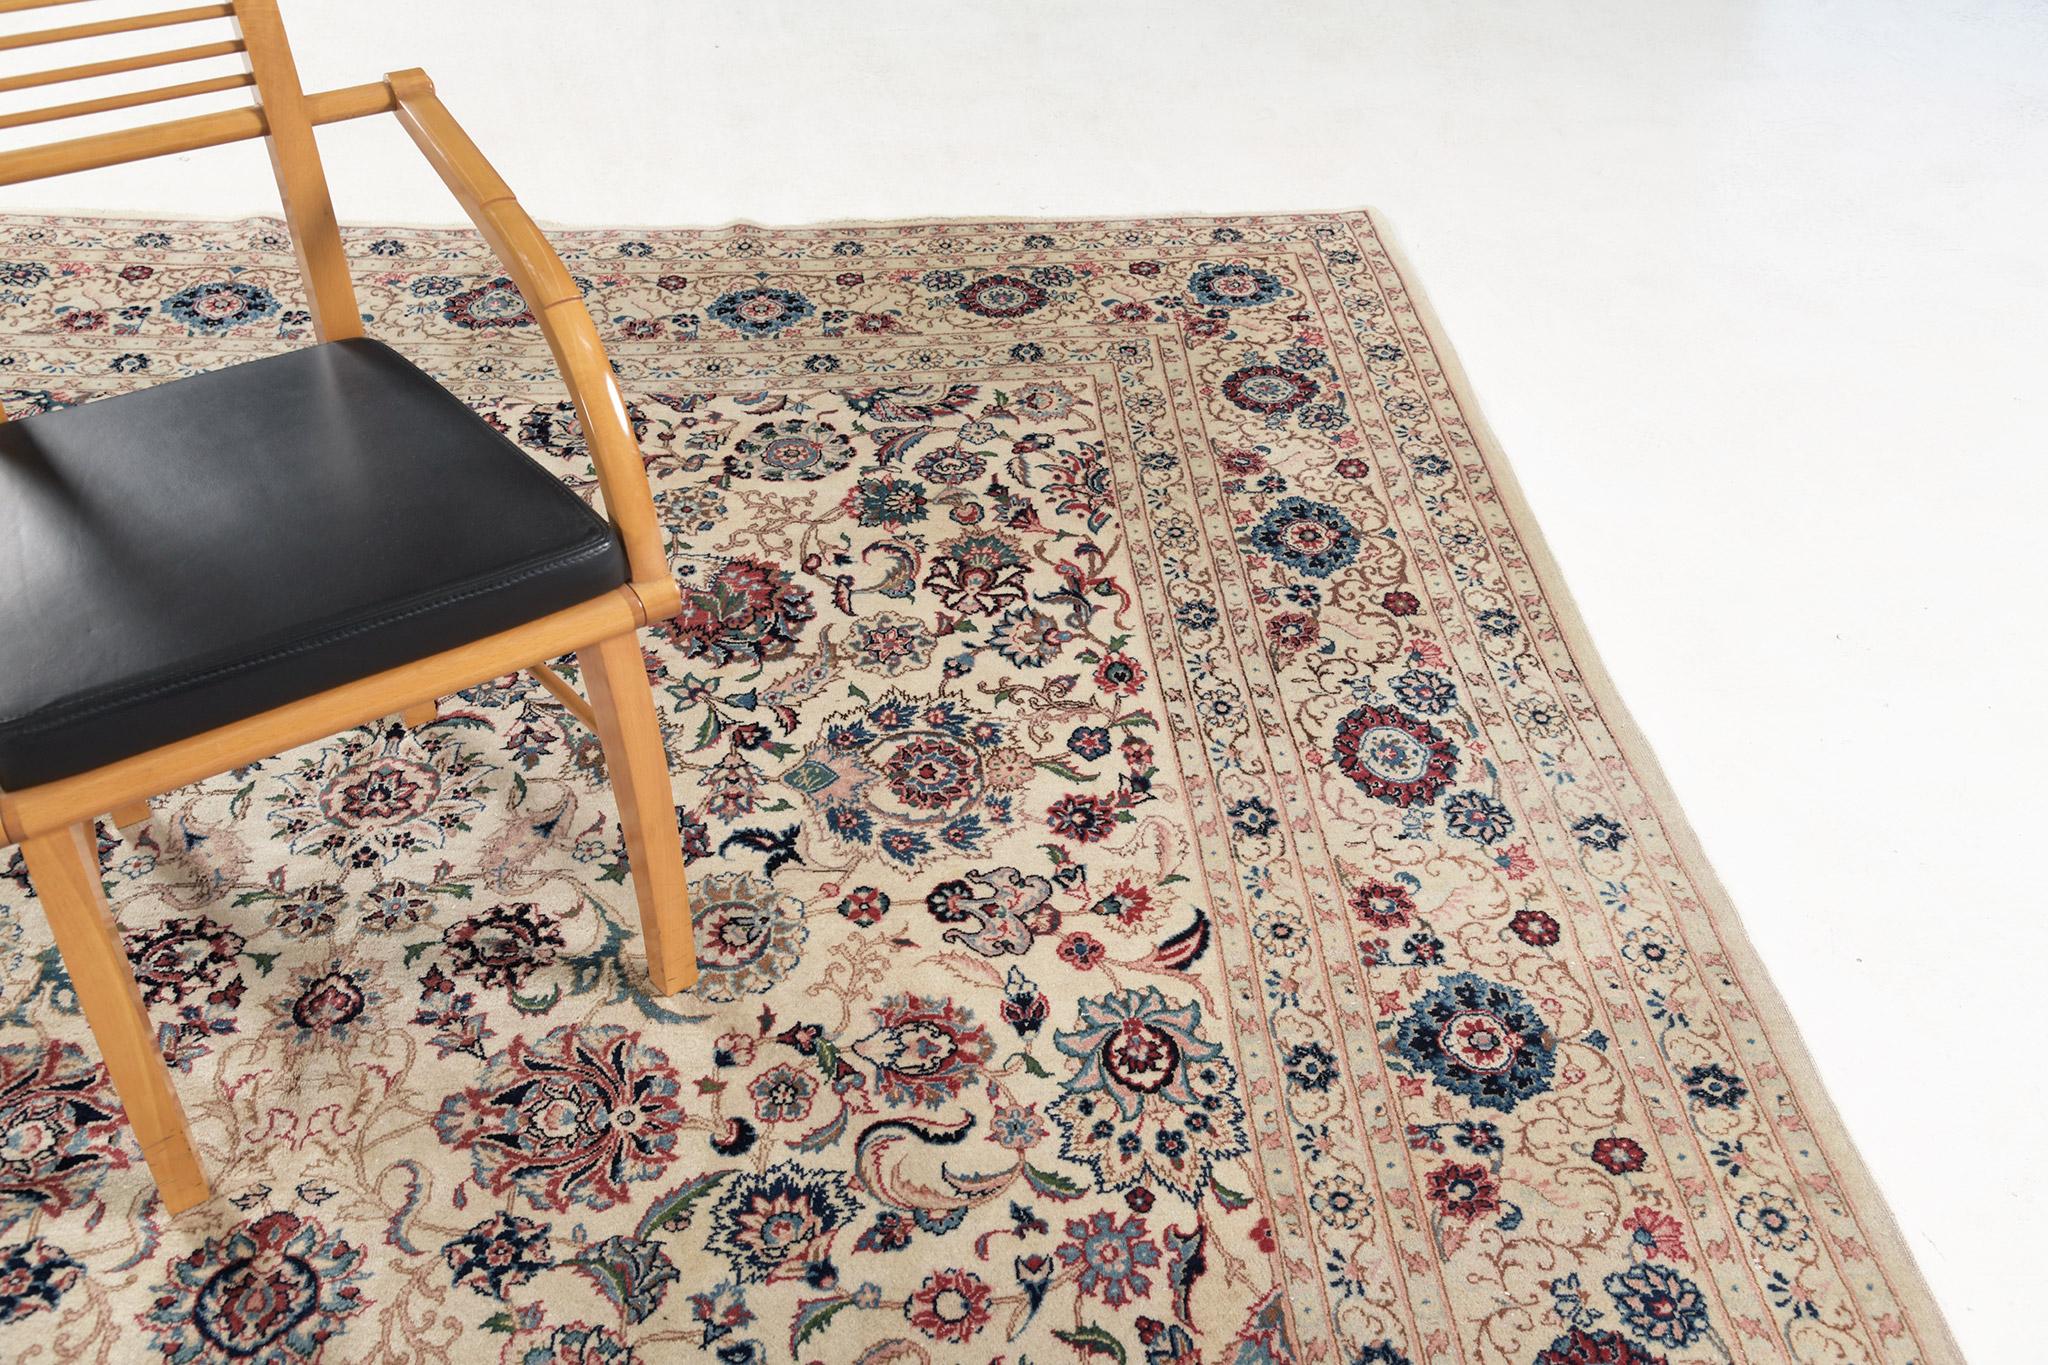 An excellent masterpiece of Kashan rug that features a penny-worth impact from its every design. At its core, majestically presents a detailed full bloom design. It is surrounded by an elegant scroll of connecting motifs. An effortless combination